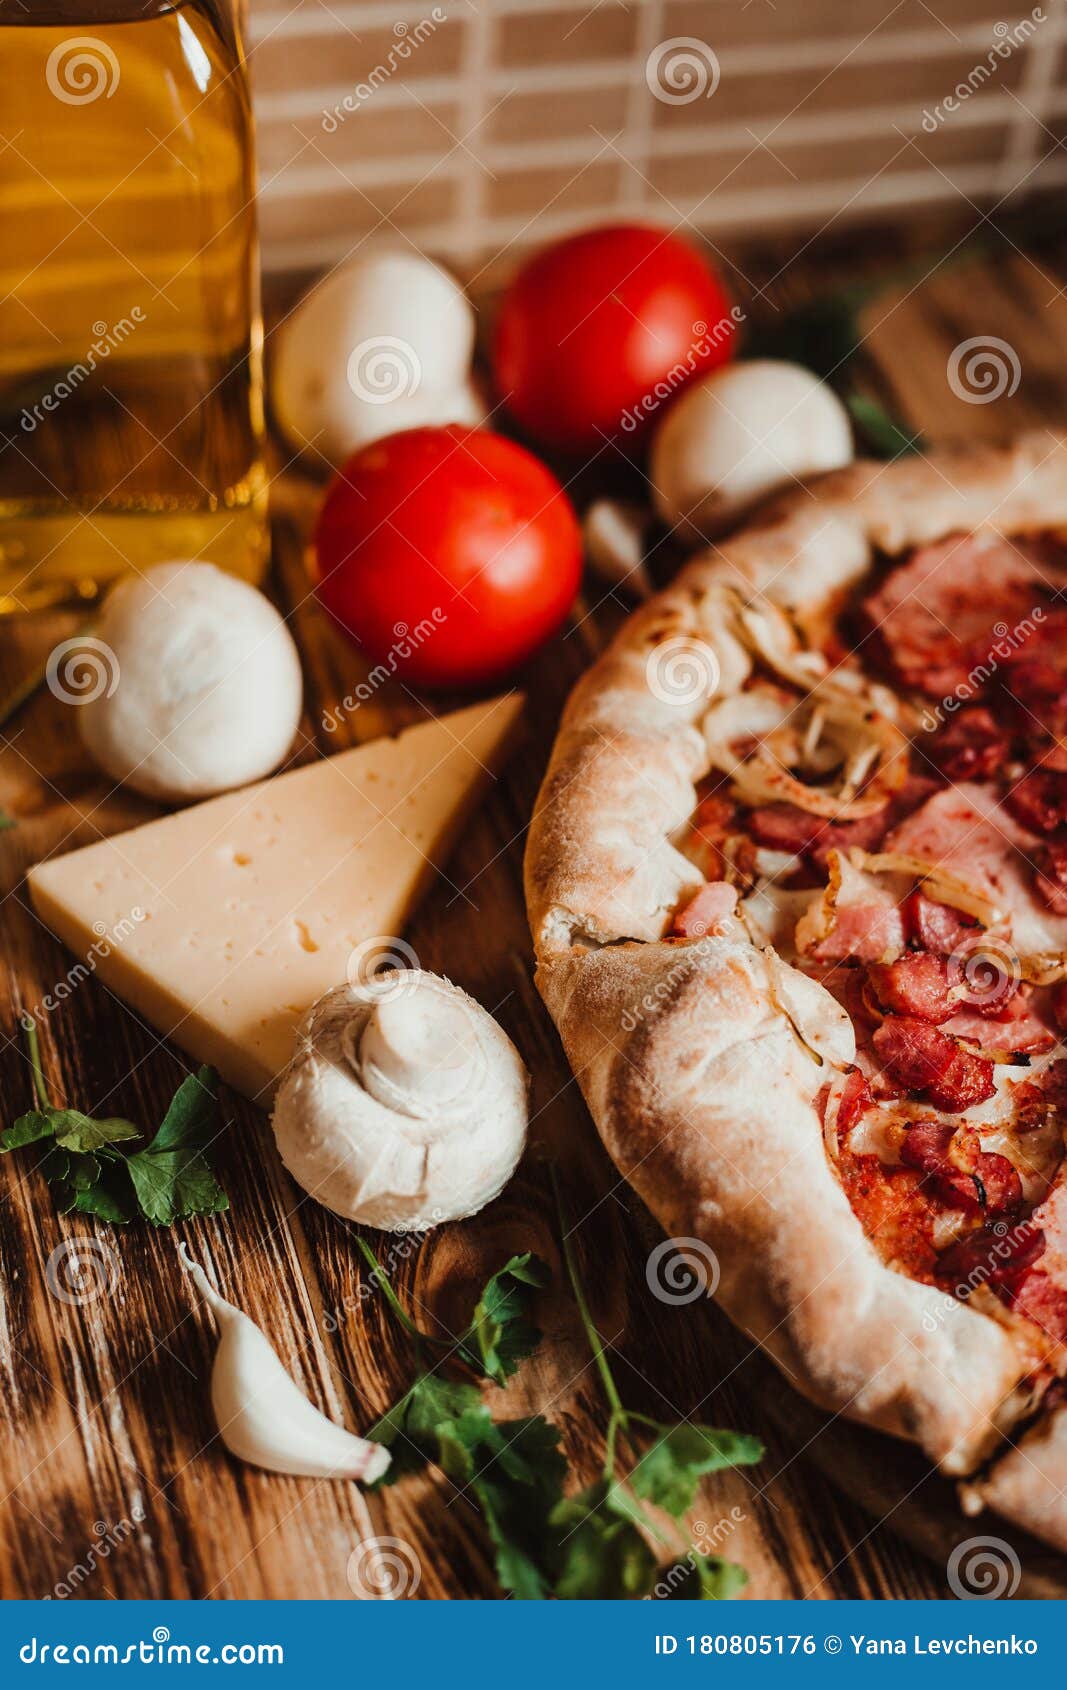 316 Pizza Transparent Photos Free Royalty Free Stock Photos From Dreamstime